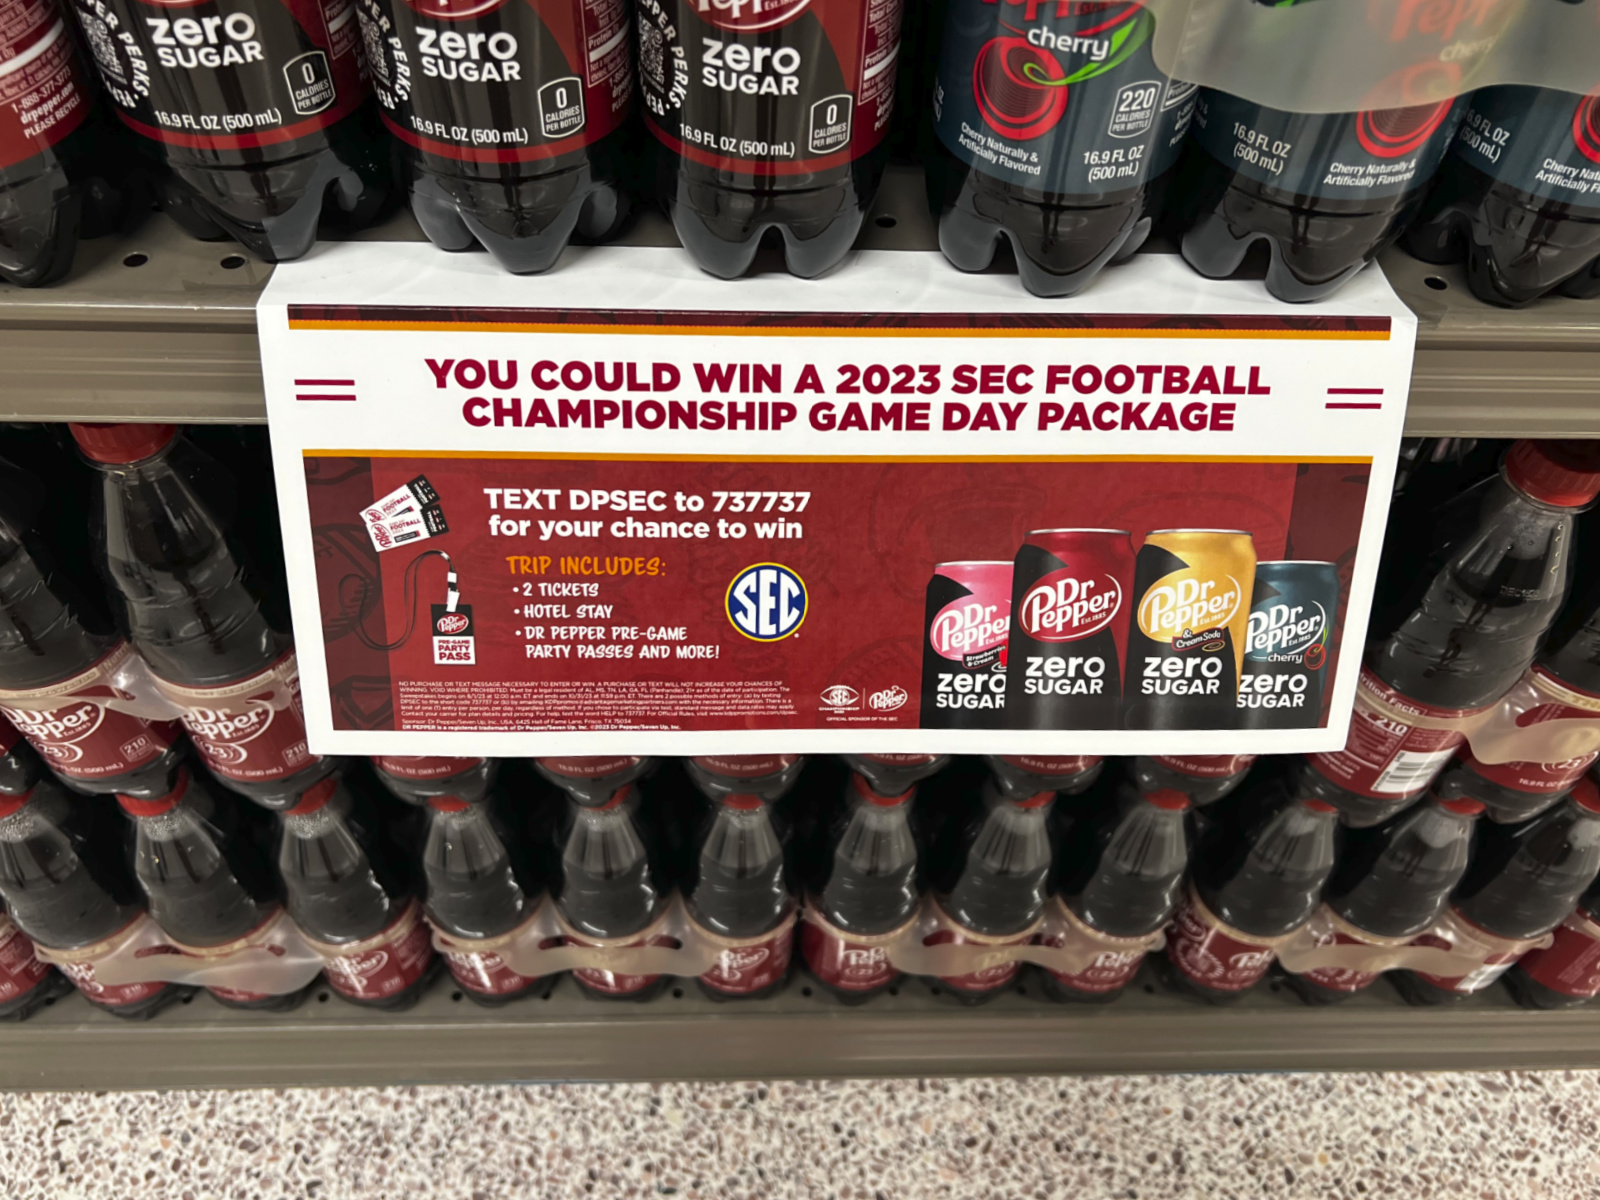 Dr Pepper Sweepstakes – Enter To Win A Trip To The 2023 SEC Championship Game Day Package